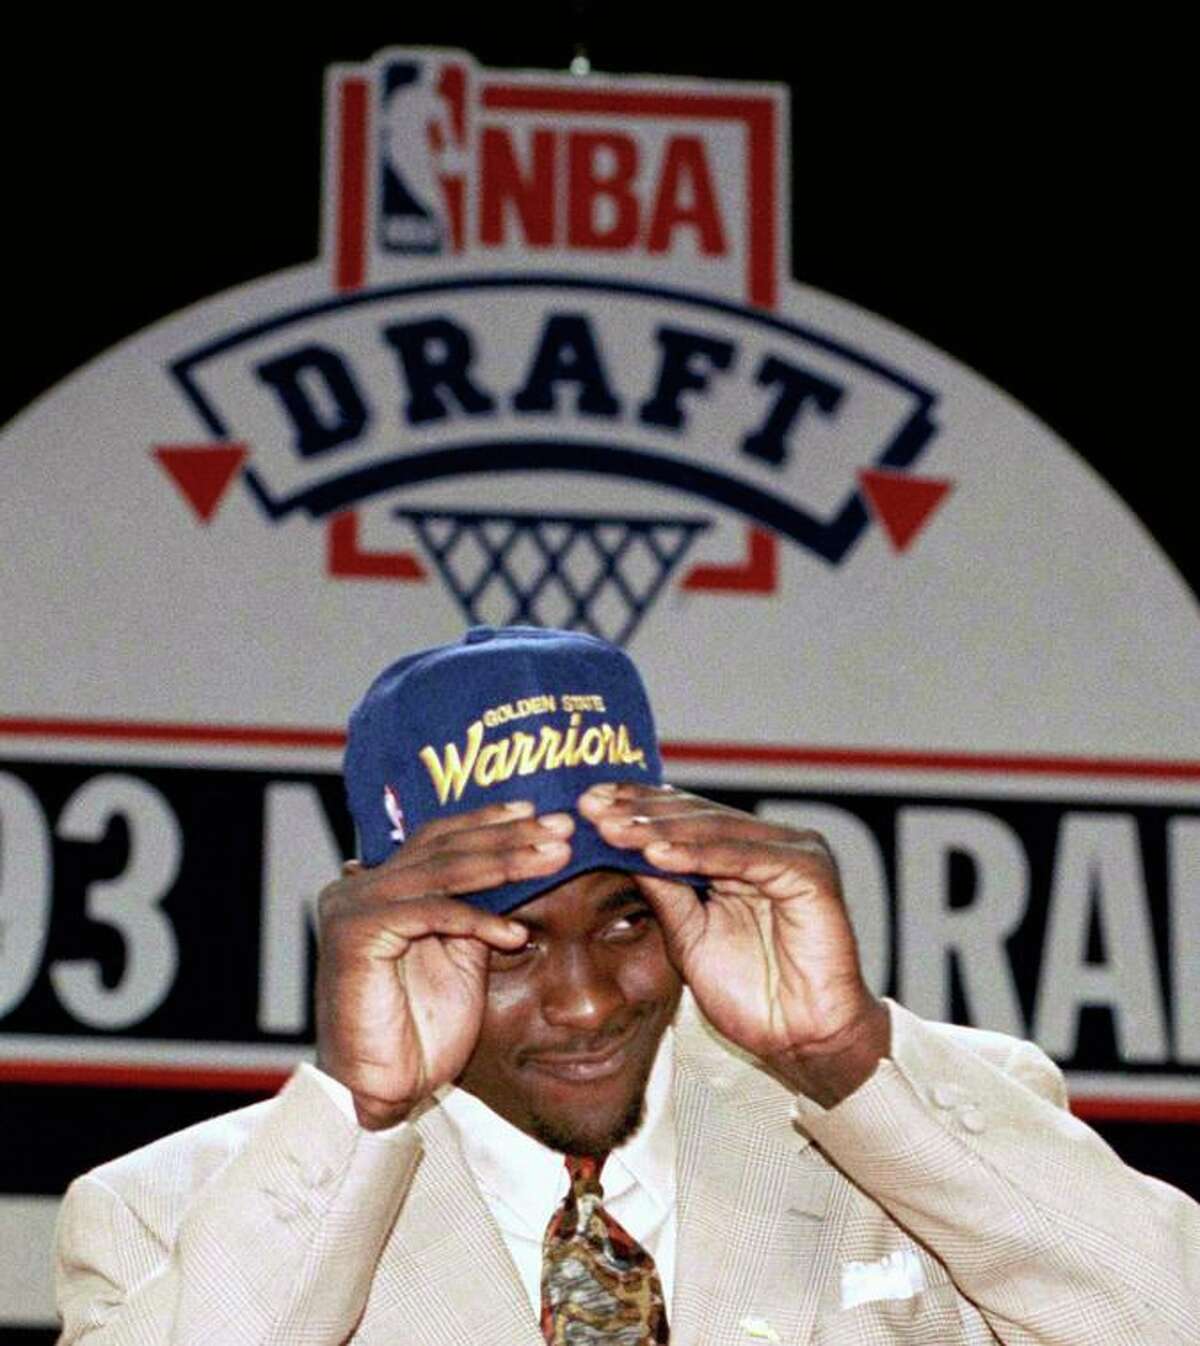 Michigans Chris Webber puts on a Golden State Warriors hat after Webber was traded to Golden State during the NBA draft at the Palace, Wednesday, June 30, 1993, Auburn Hills, Mich. Webber was the first selection in the draft by the Orlando Magic, then he was traded to Golden State when the Warriors selected, Anfernee Hardaway as the third pick. (AP Photo/Lennox Mclendon)